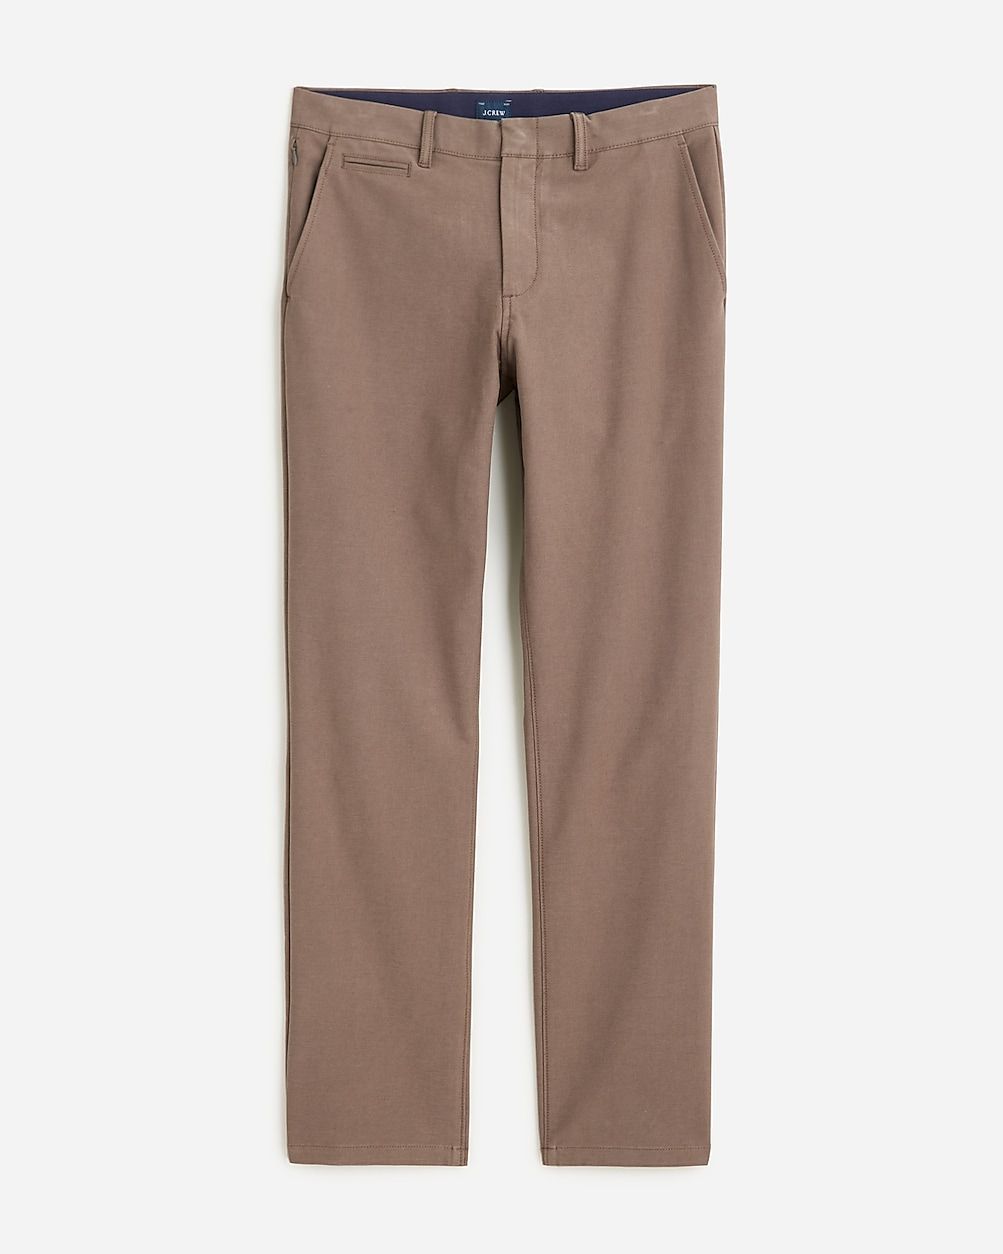 770™ Straight-fit midweight tech pant | J.Crew US